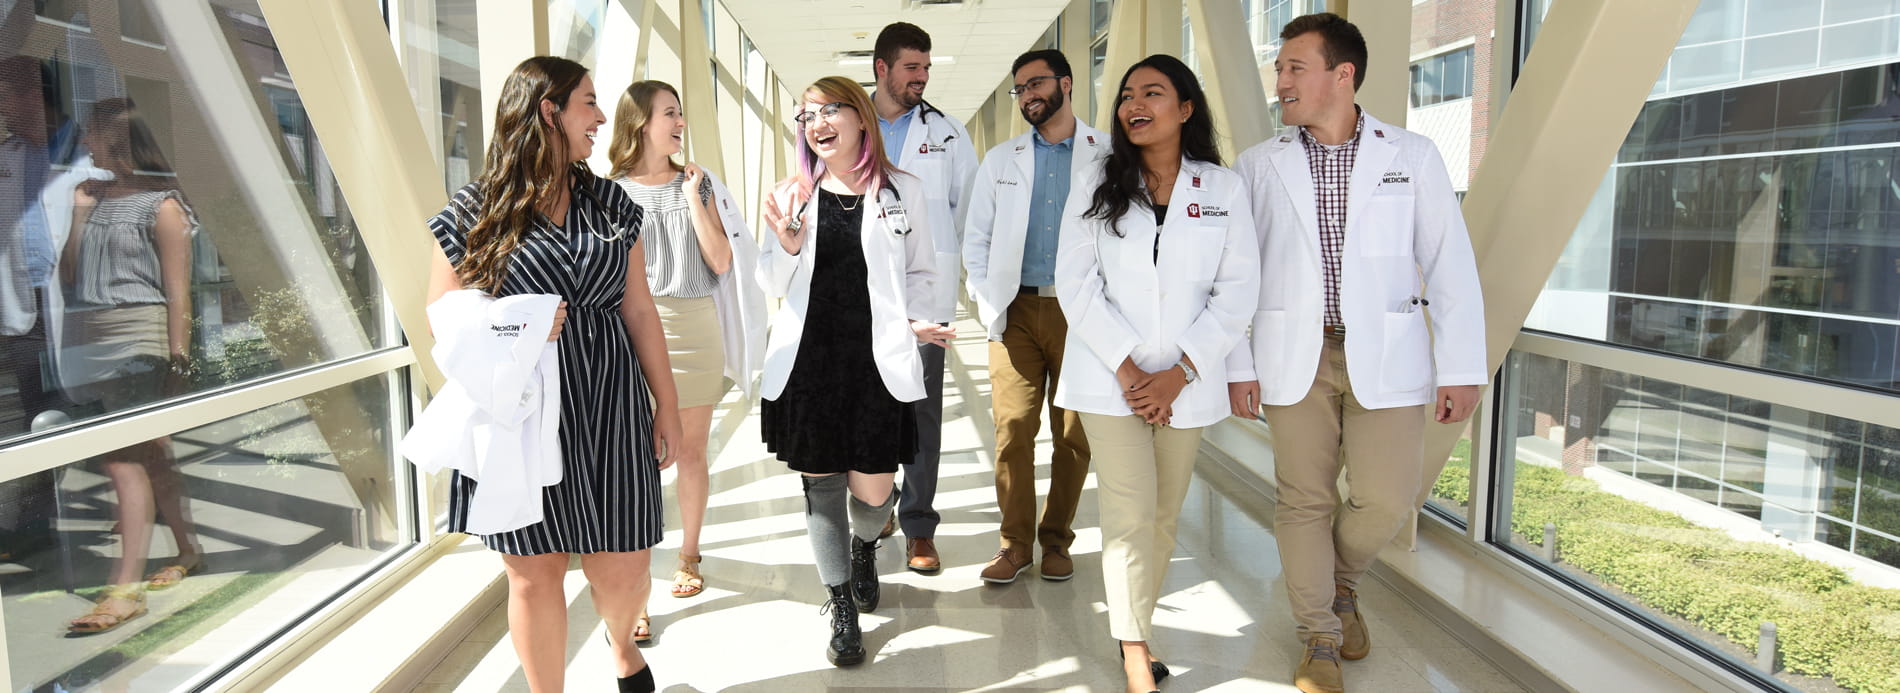 a diverse group of medical students in white coats smile and talk while walking down the hallway